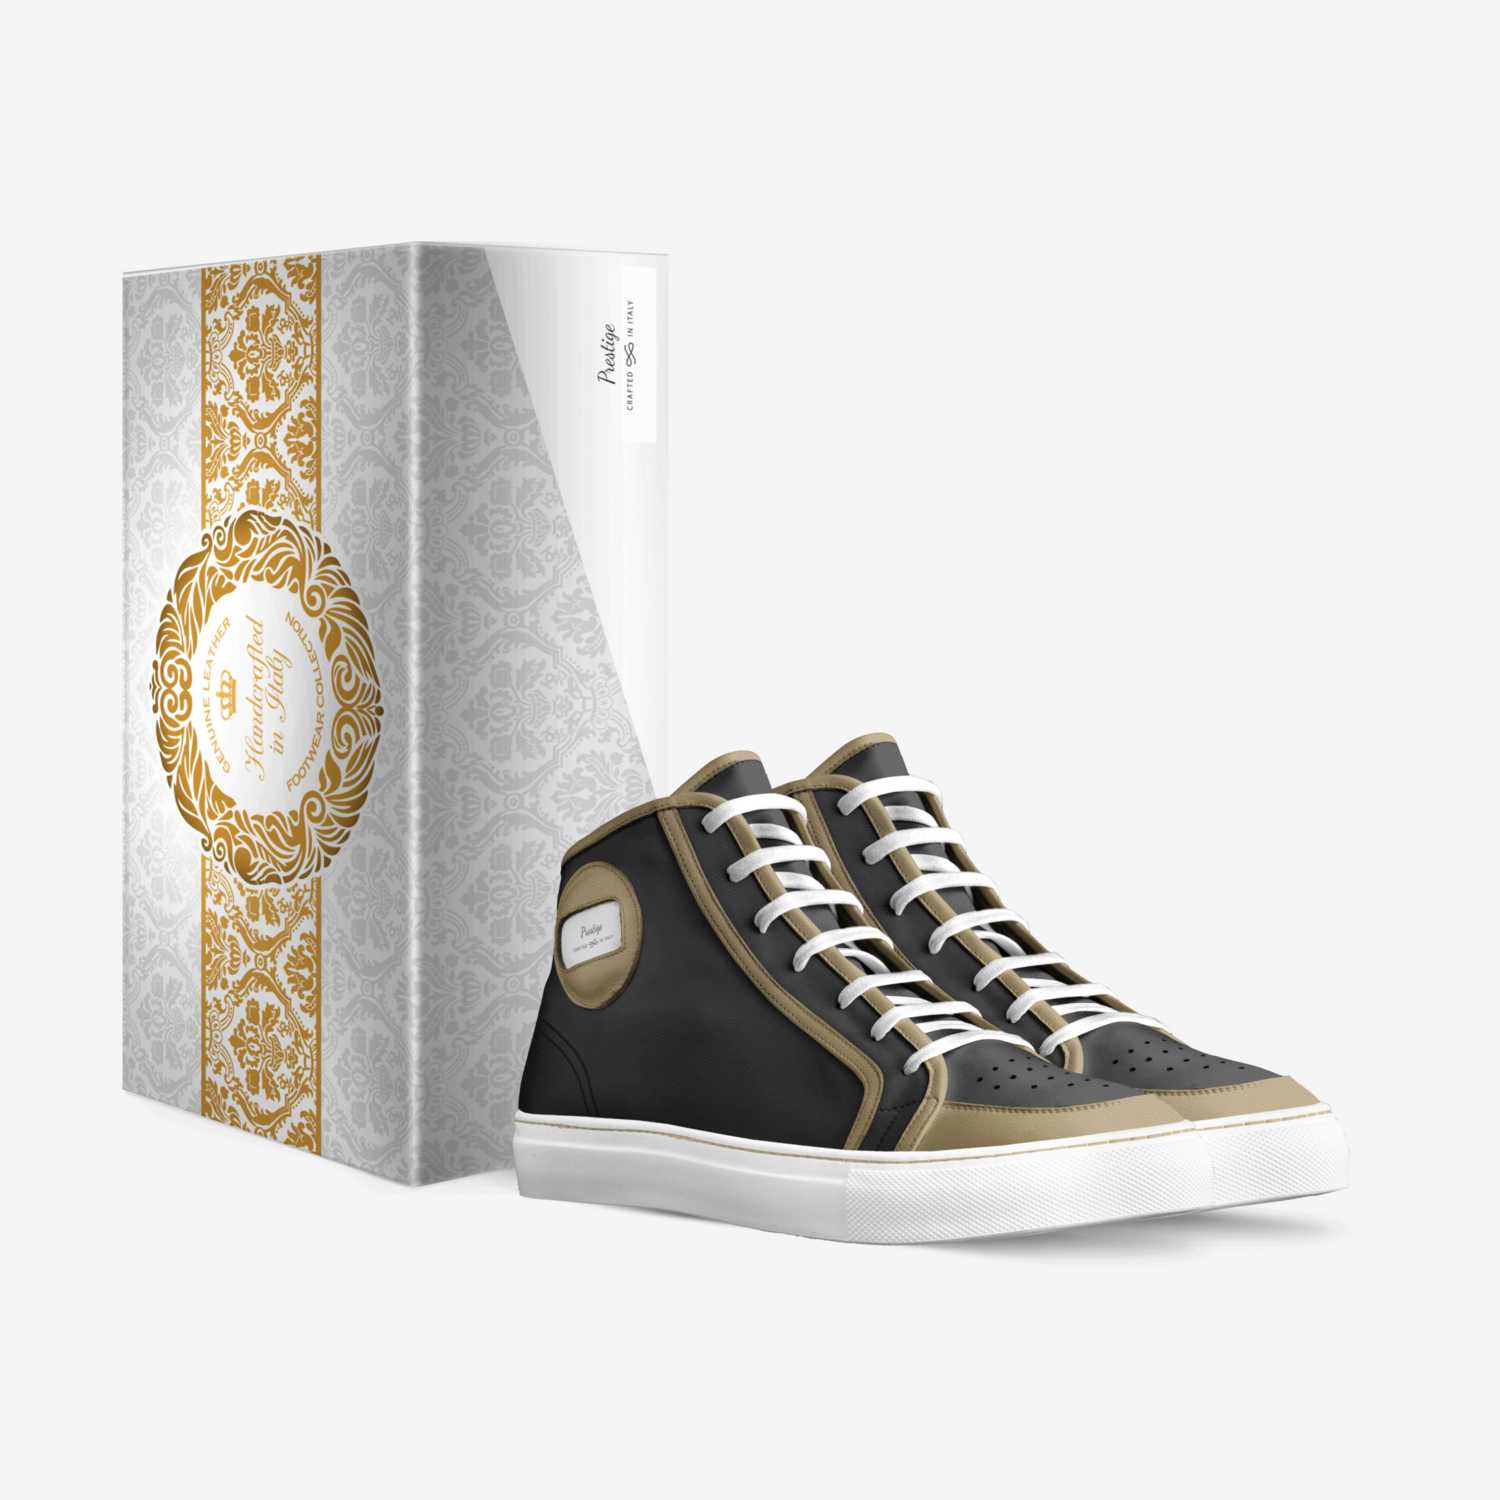 Divinity I custom made in Italy shoes by John Linzie | Box view